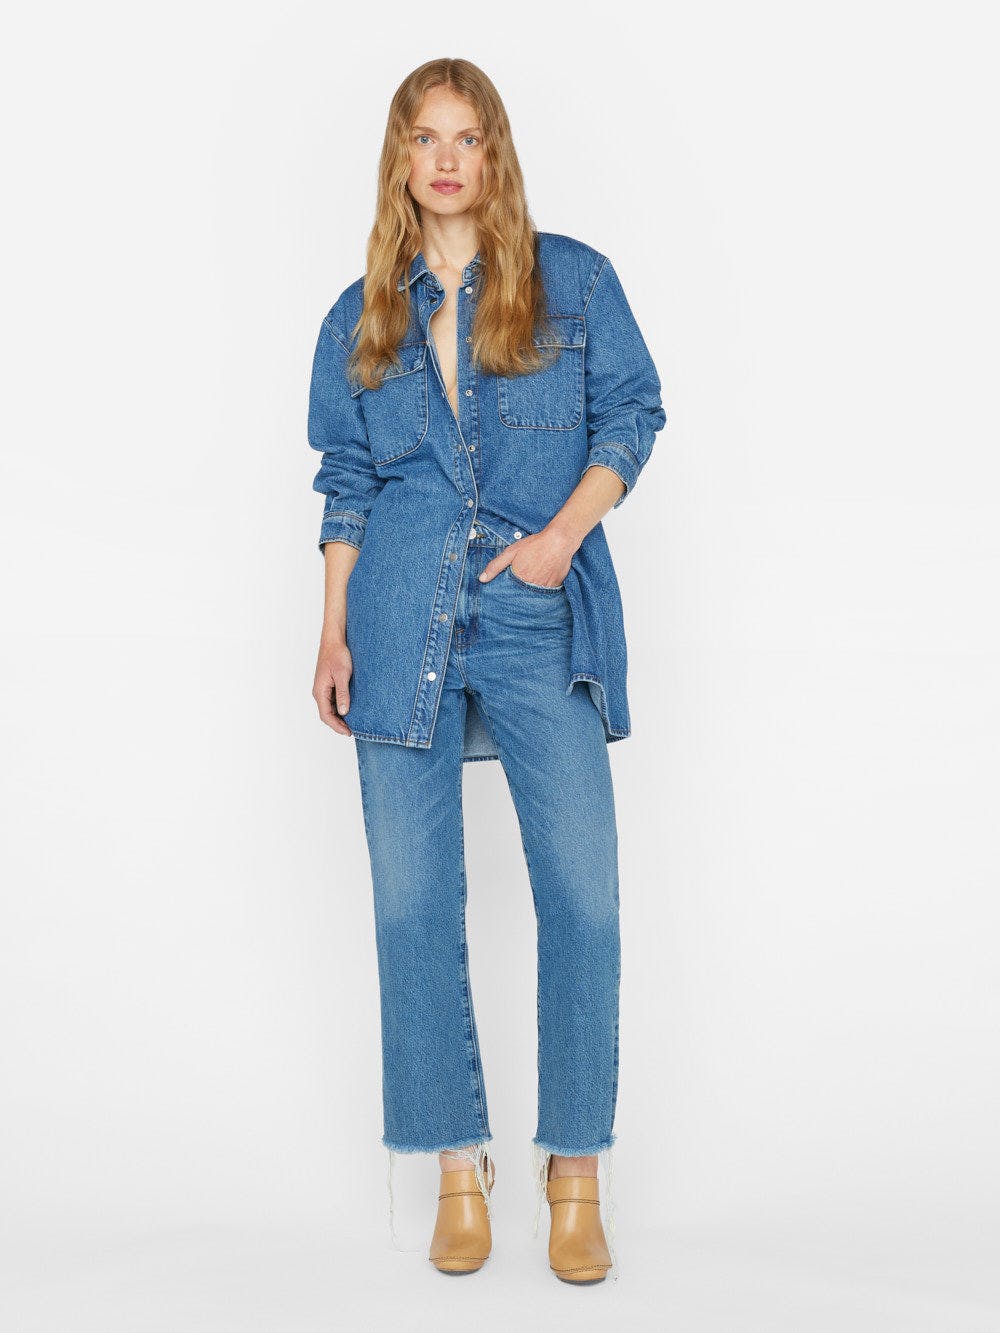 The model is wearing a bestselling Frame Le Jane Crop - Caramia blue denim shirt and jeans.